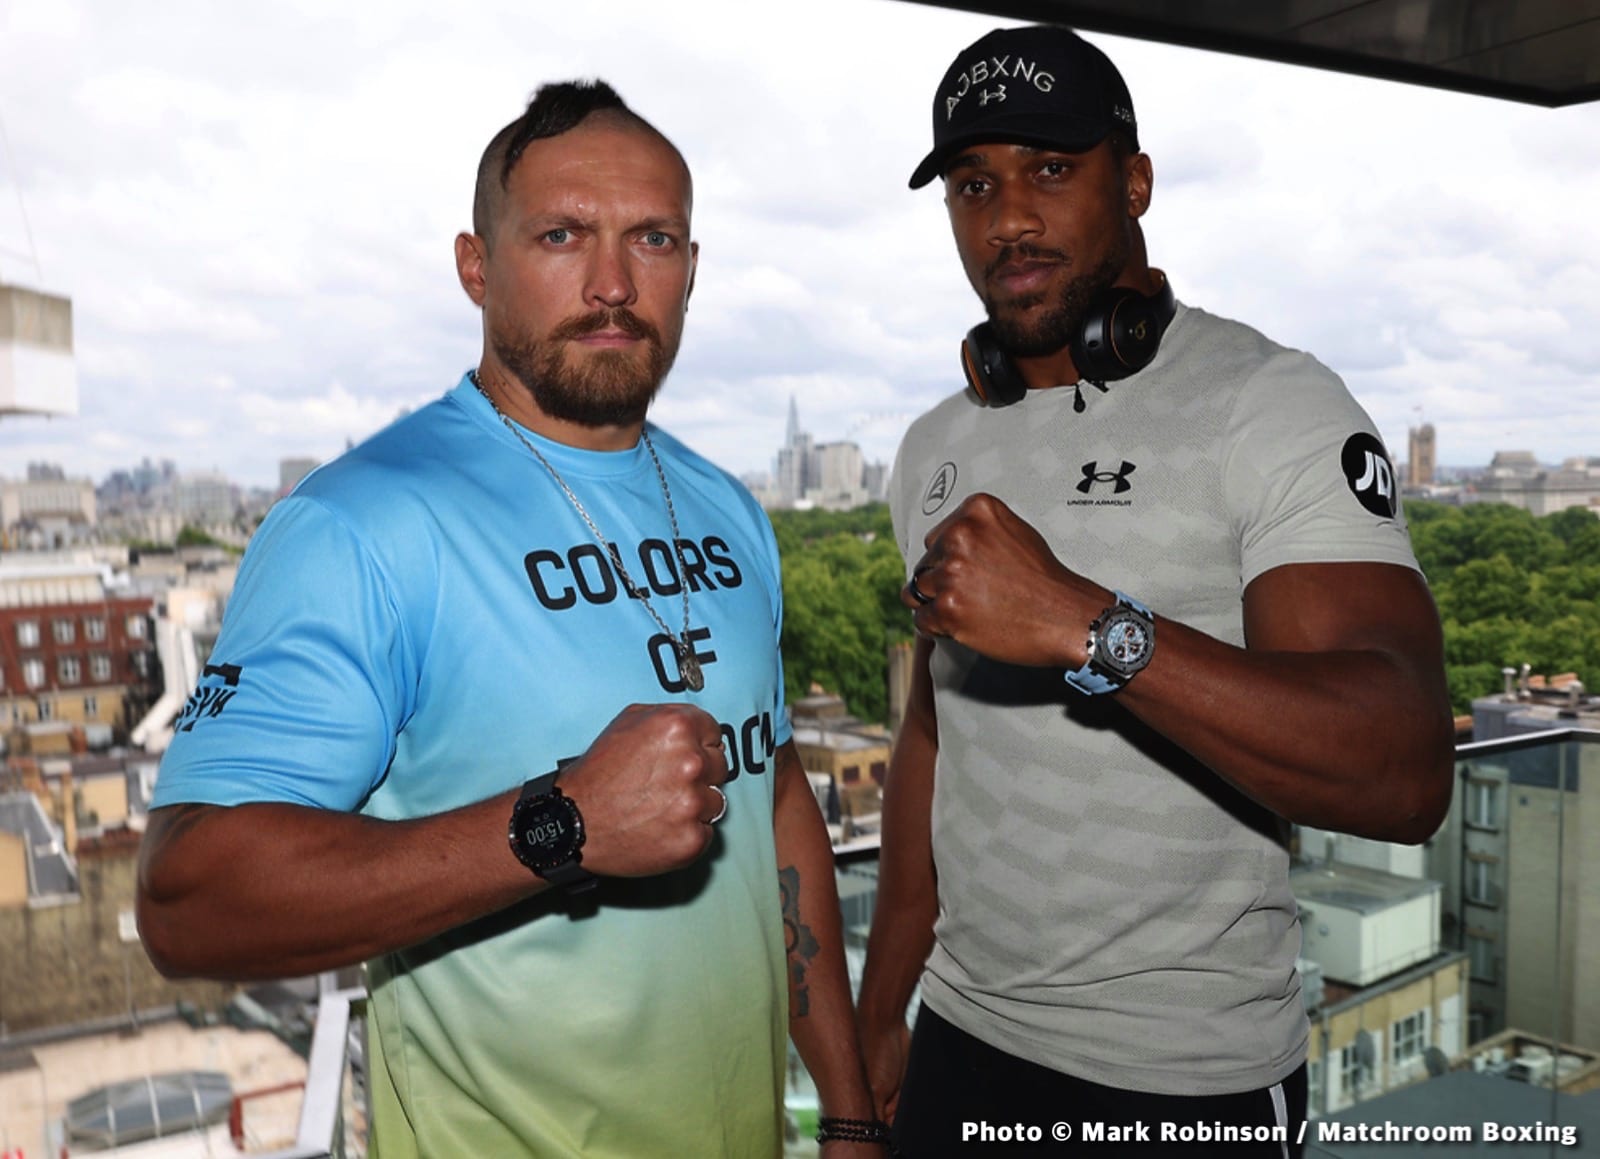 Image: Joshua will fight Fury regardless of outcome against Usyk says Eddie Hearn